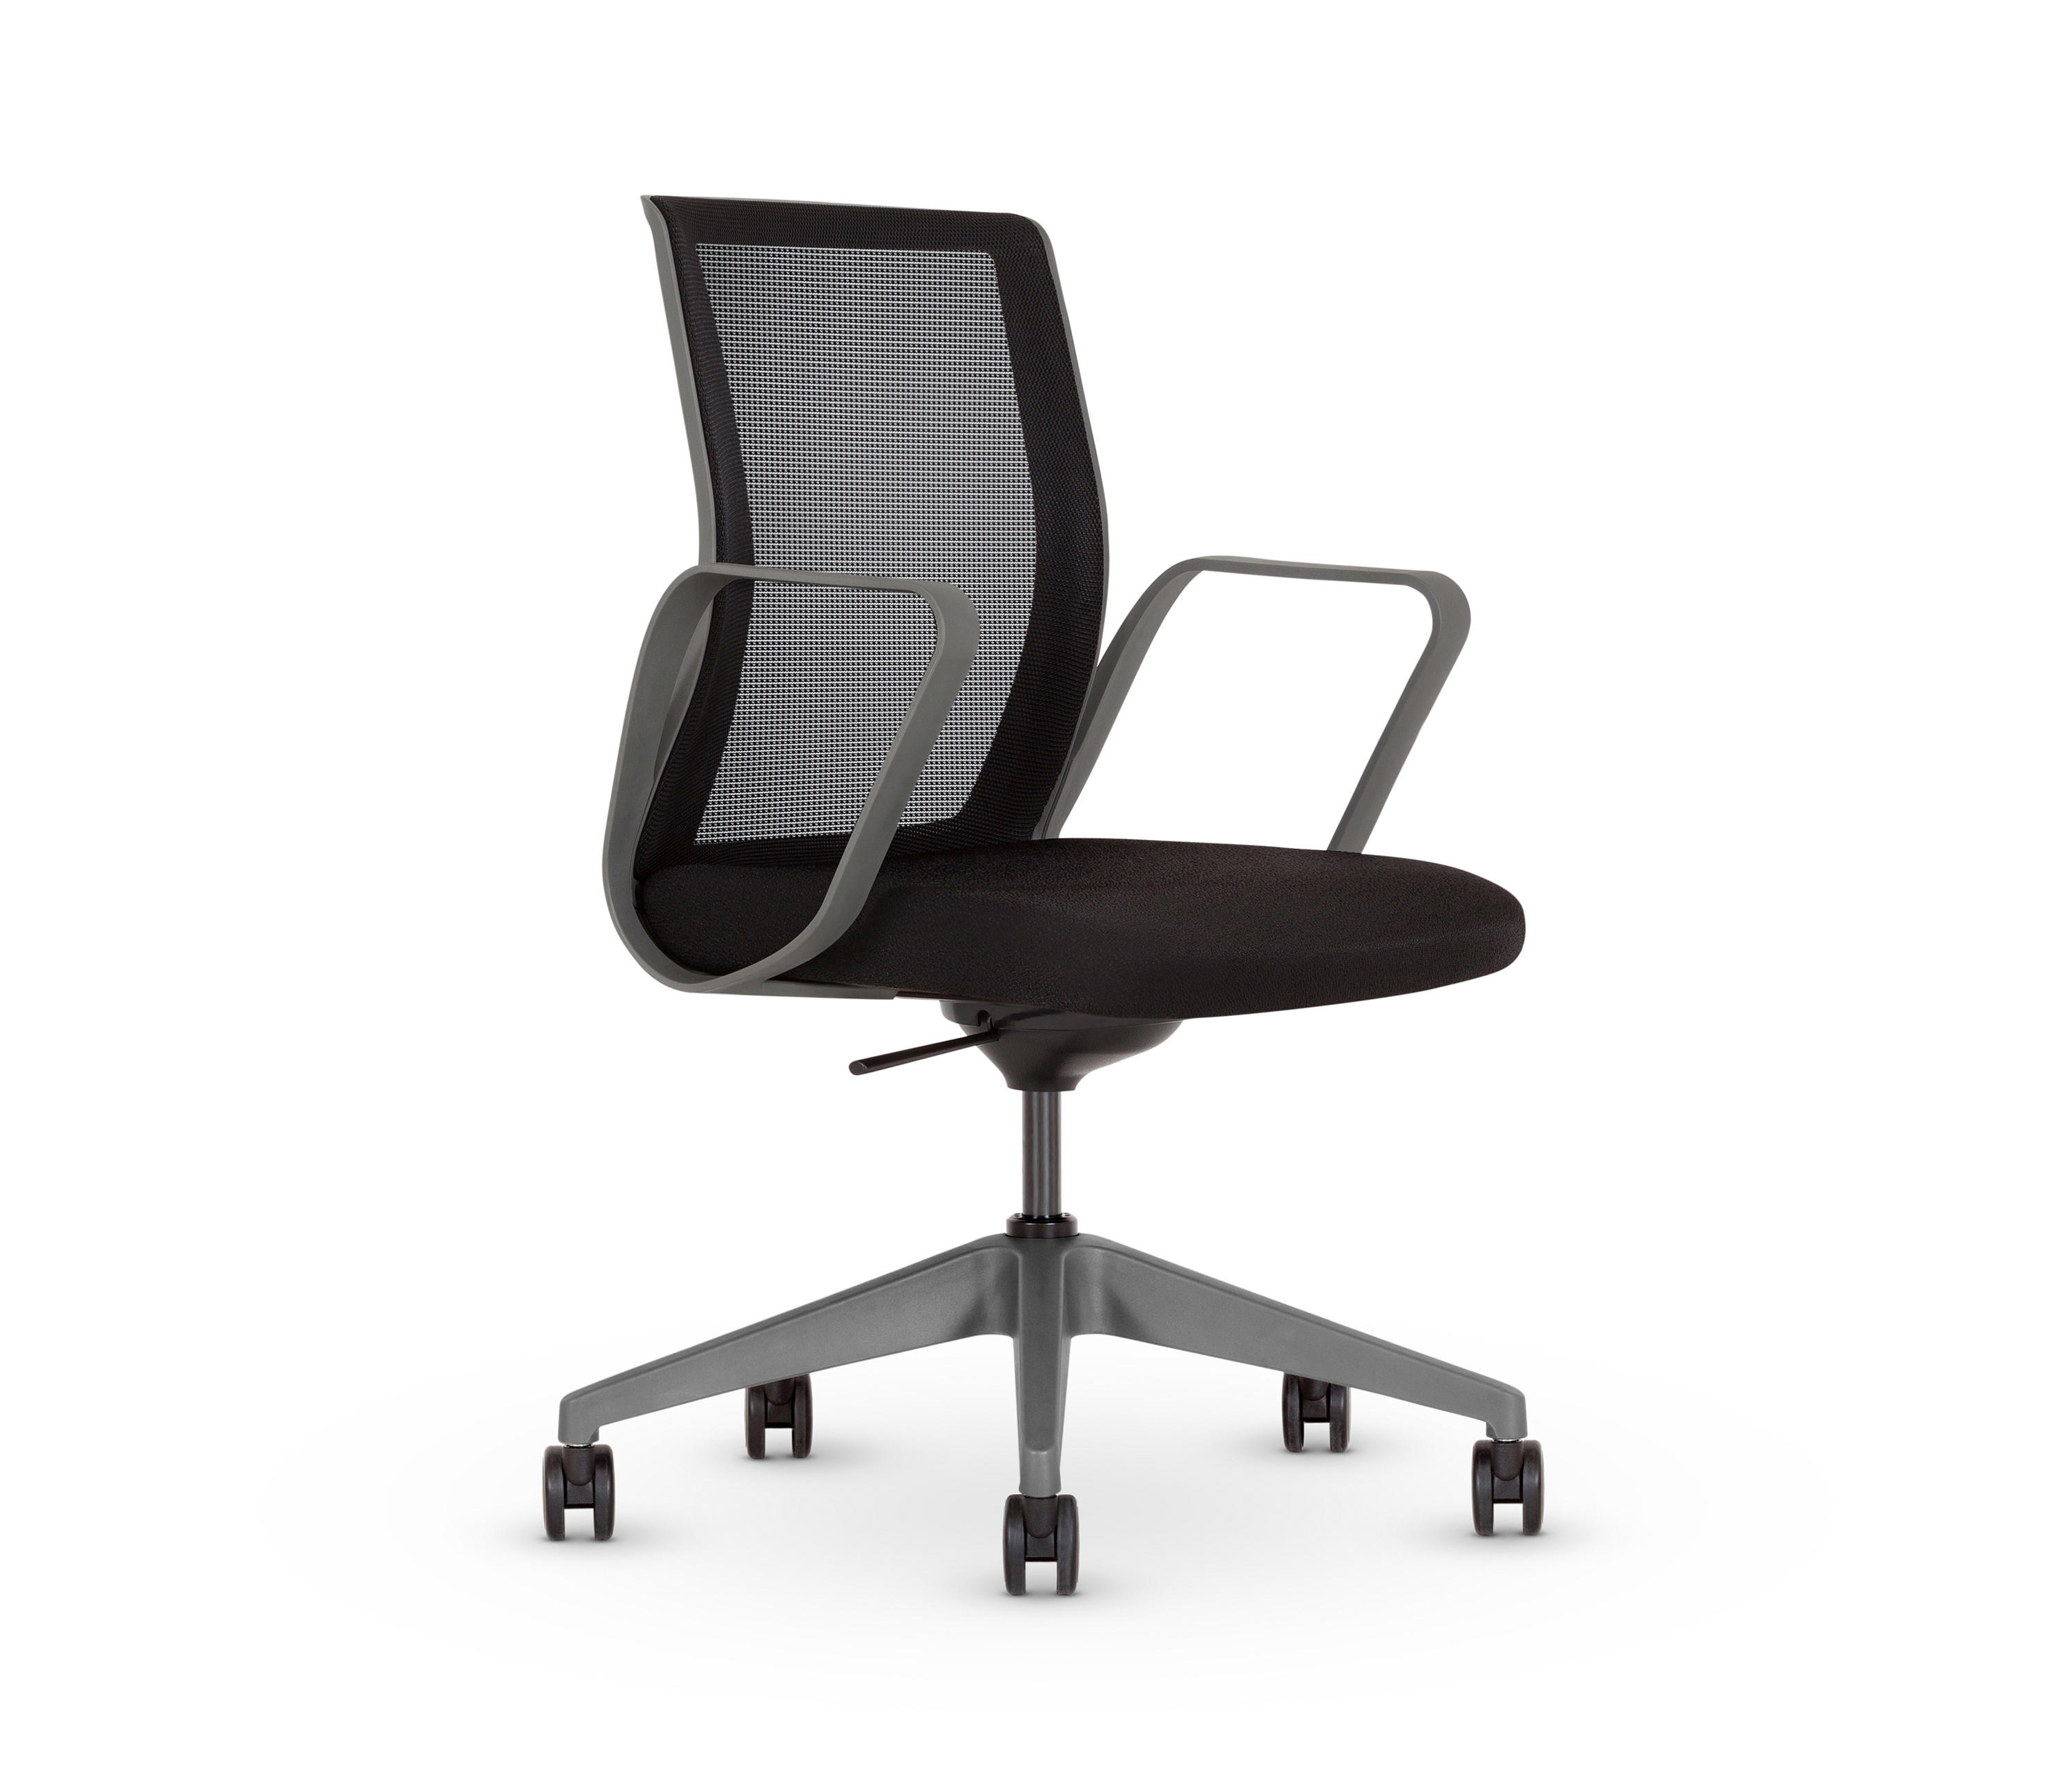 6c 61324 Chairs From Keilhauer Architonic